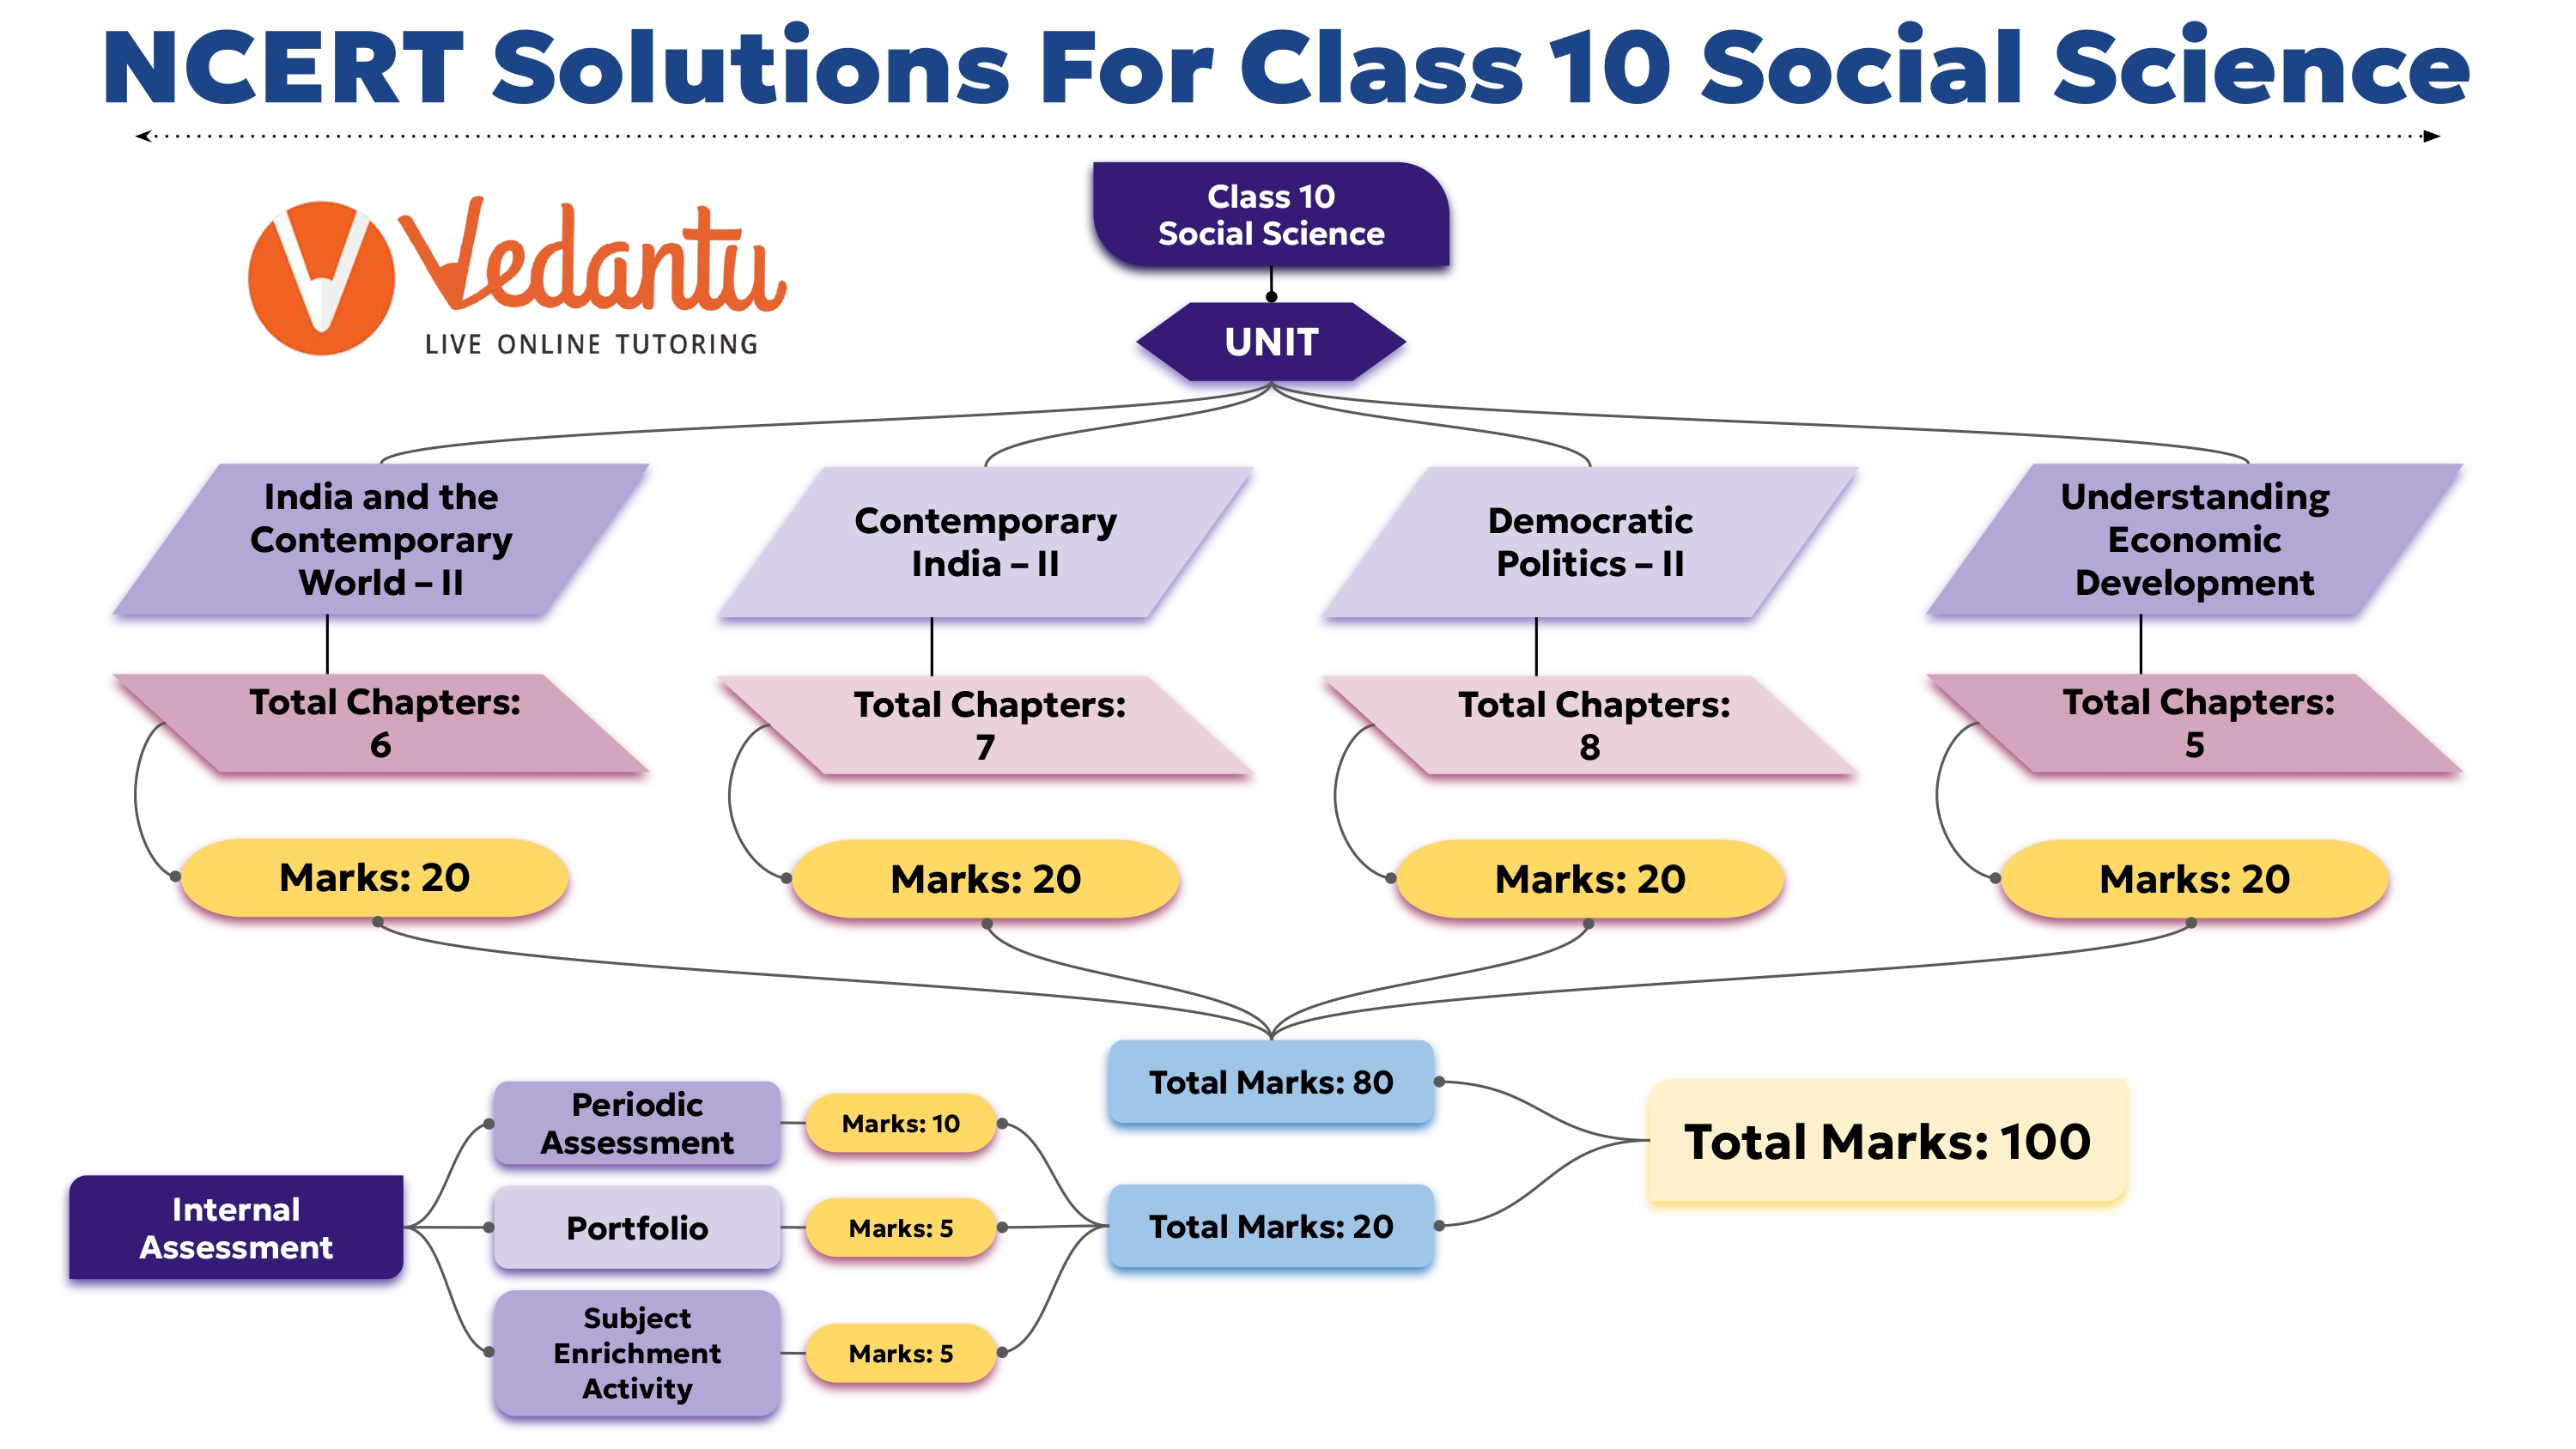 NCERT Solutions for Class 10 Social Science -Chapter-wise marks distribution